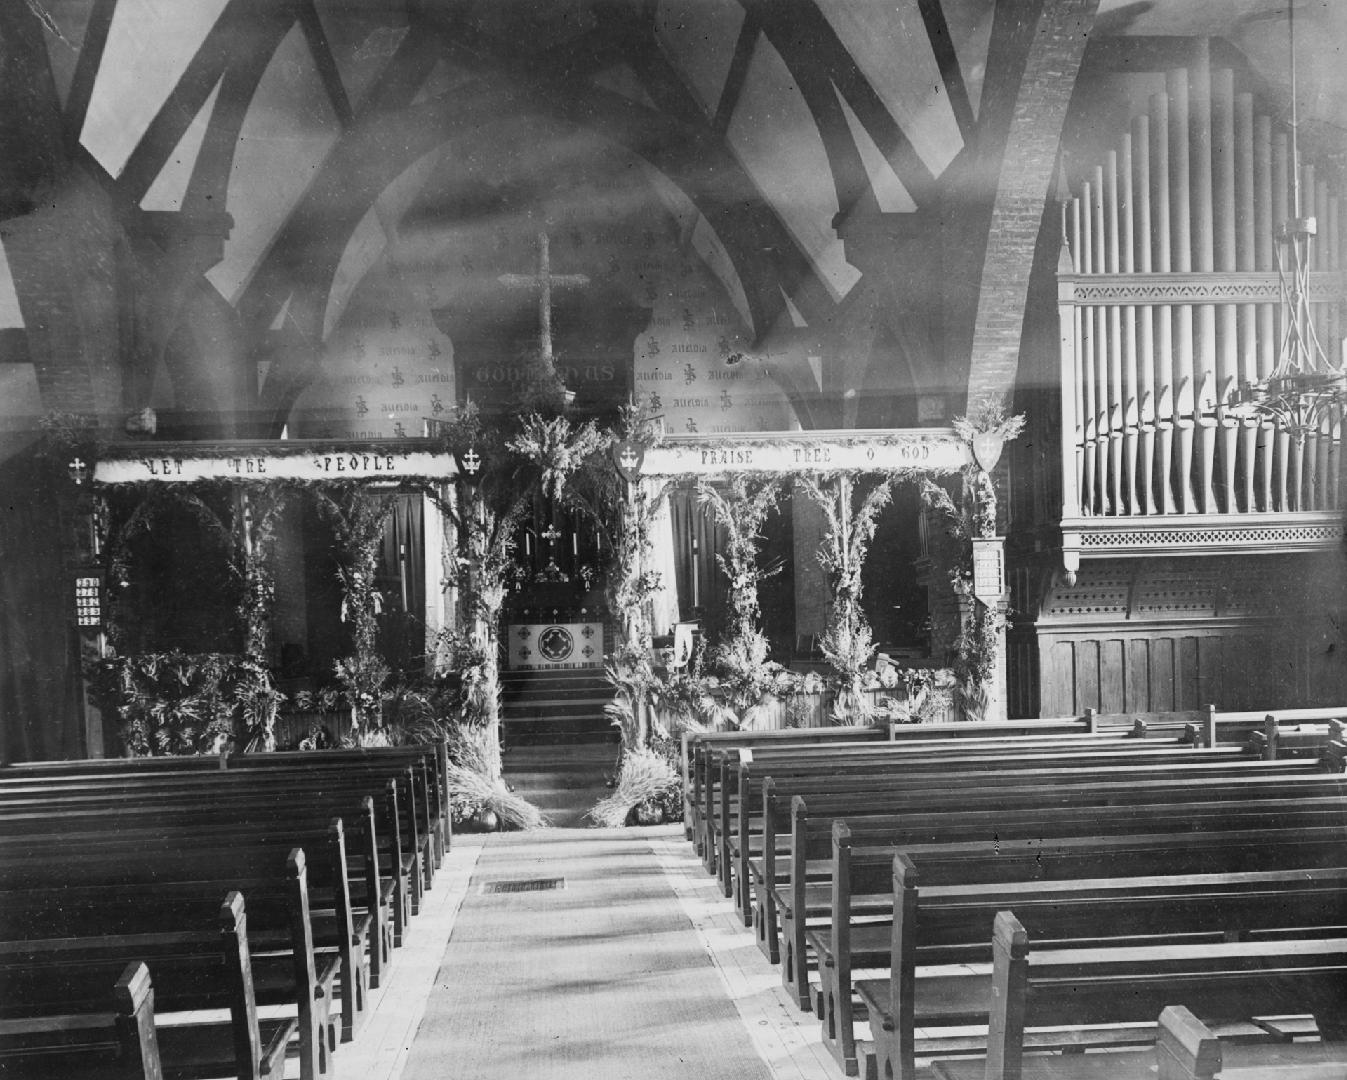 St. Thomas' Anglican Church (opened 1893), Huron St., east side, opposite Washington Avenue, Interior